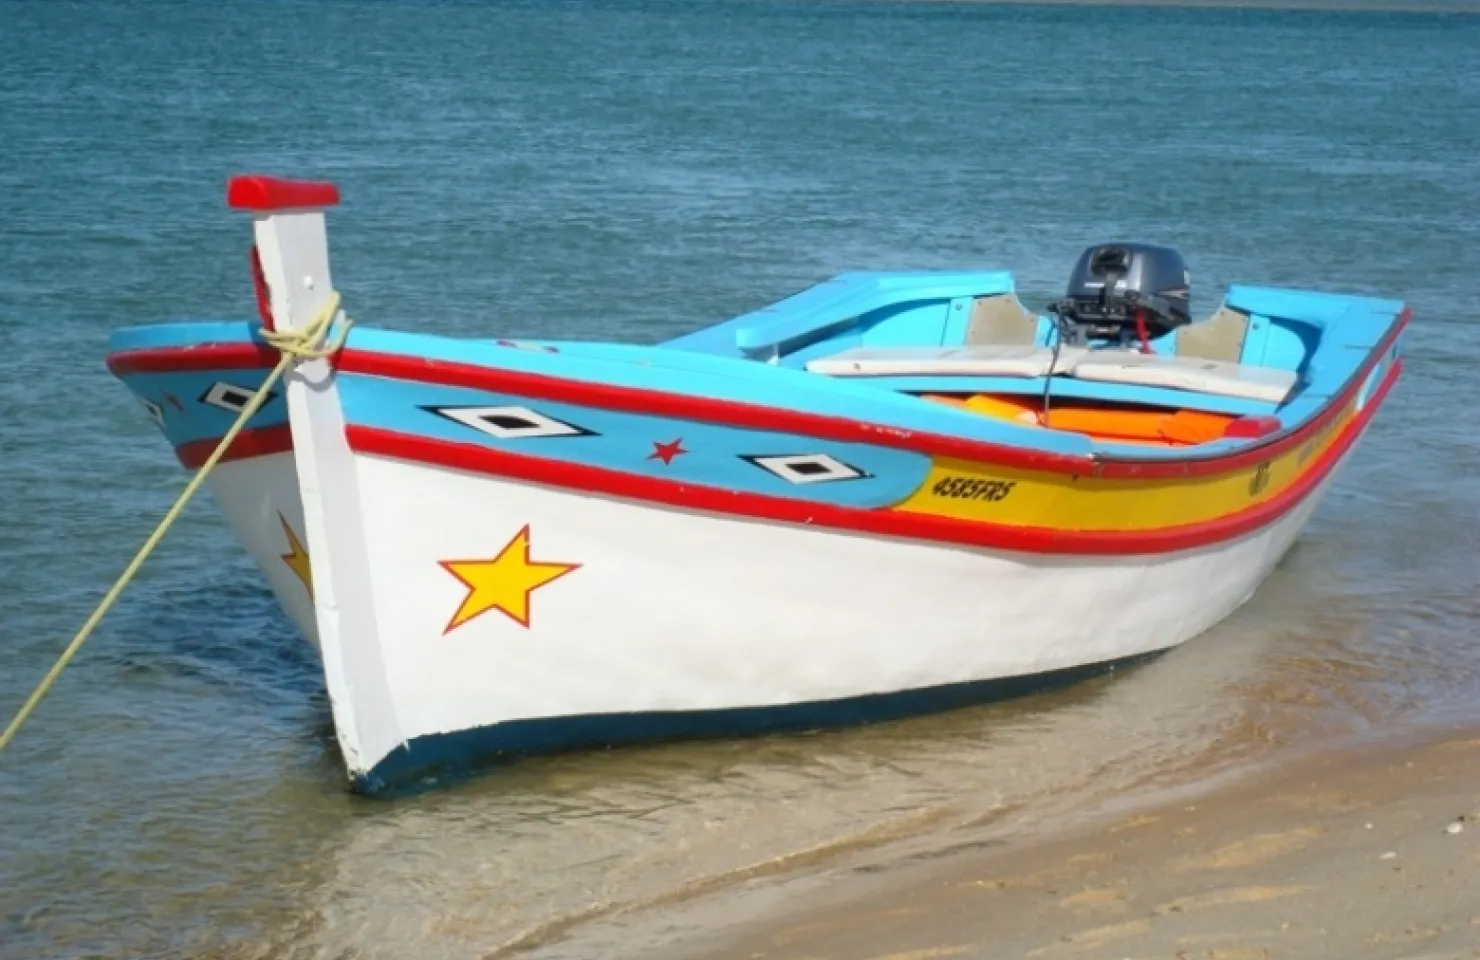 Traditional Boat Trip on The Ria Formosa - Algarve Boat Tours